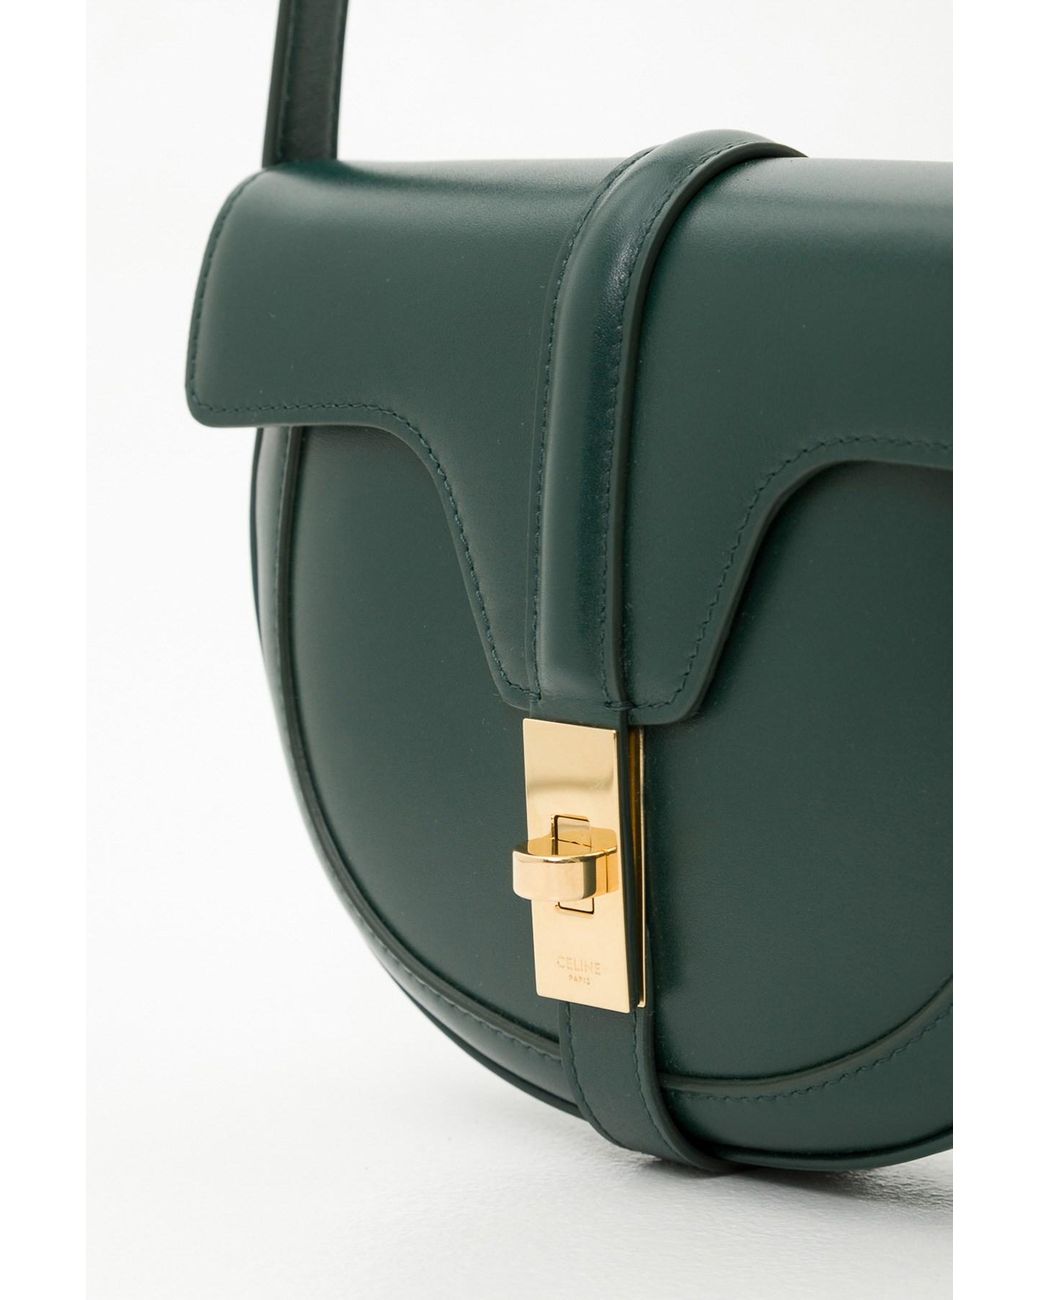 Celine Small Besace 16 Bag in Green | Lyst